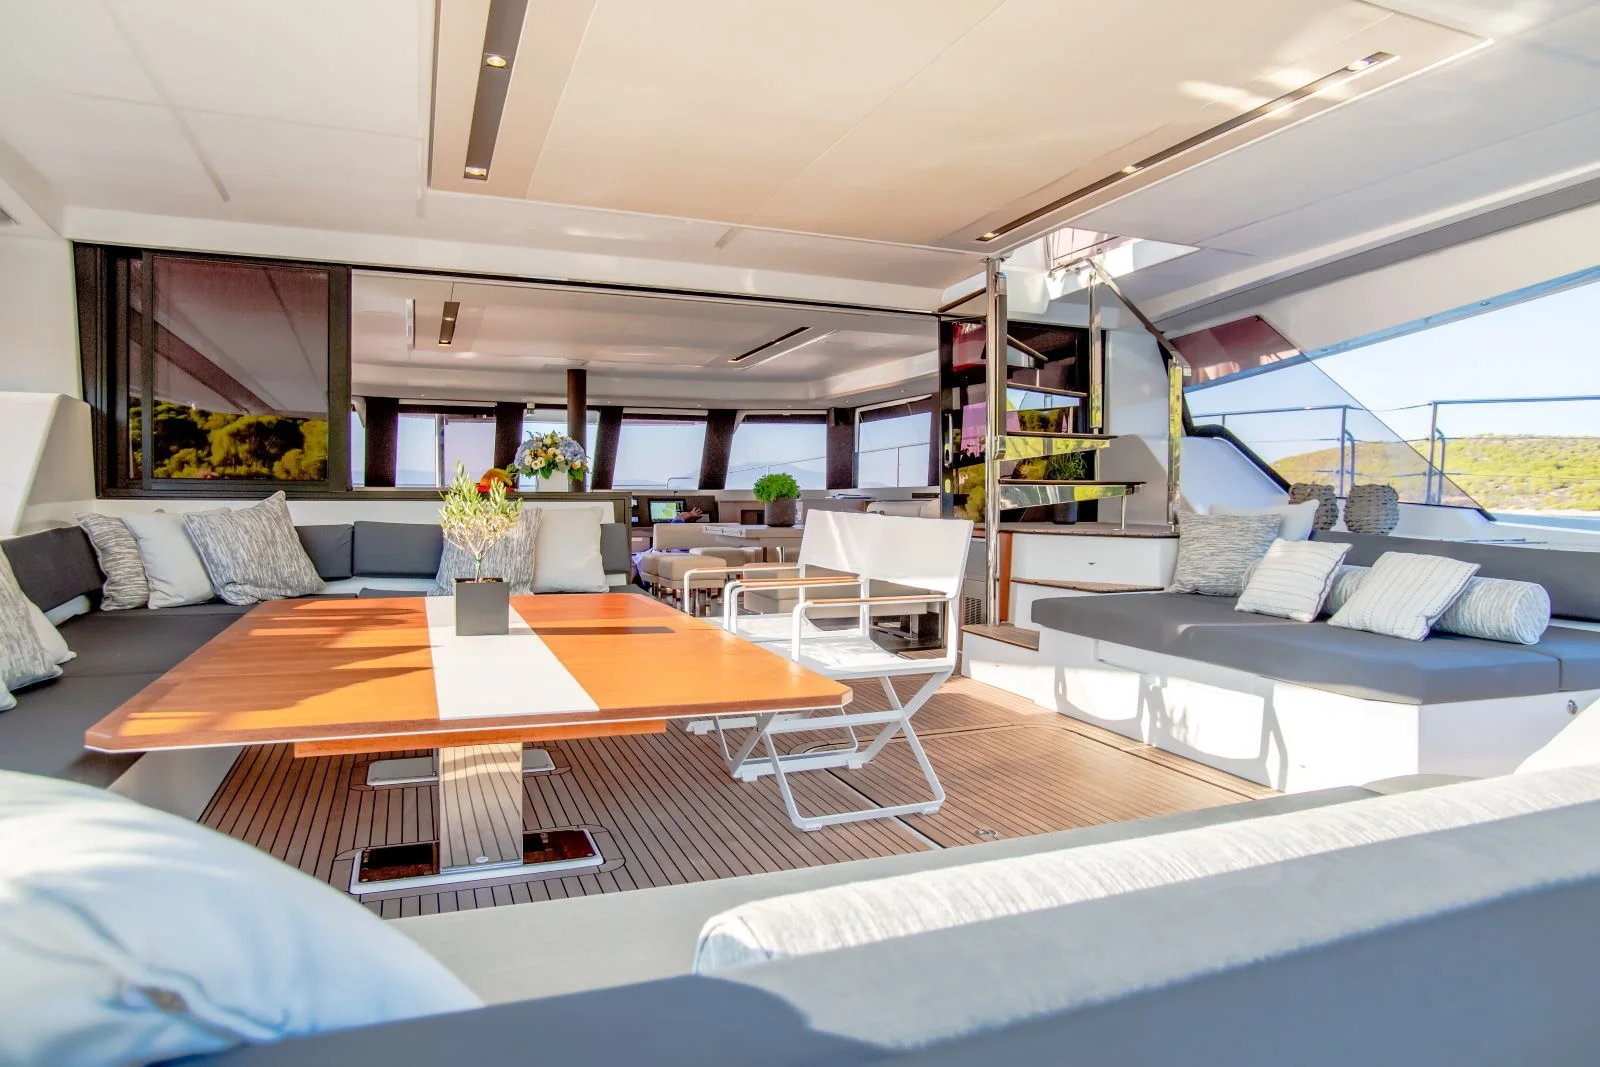 A really spacious aft cockpit and a saloon on Fountain Pajot Power 67 catamaran, which is less than 20 m